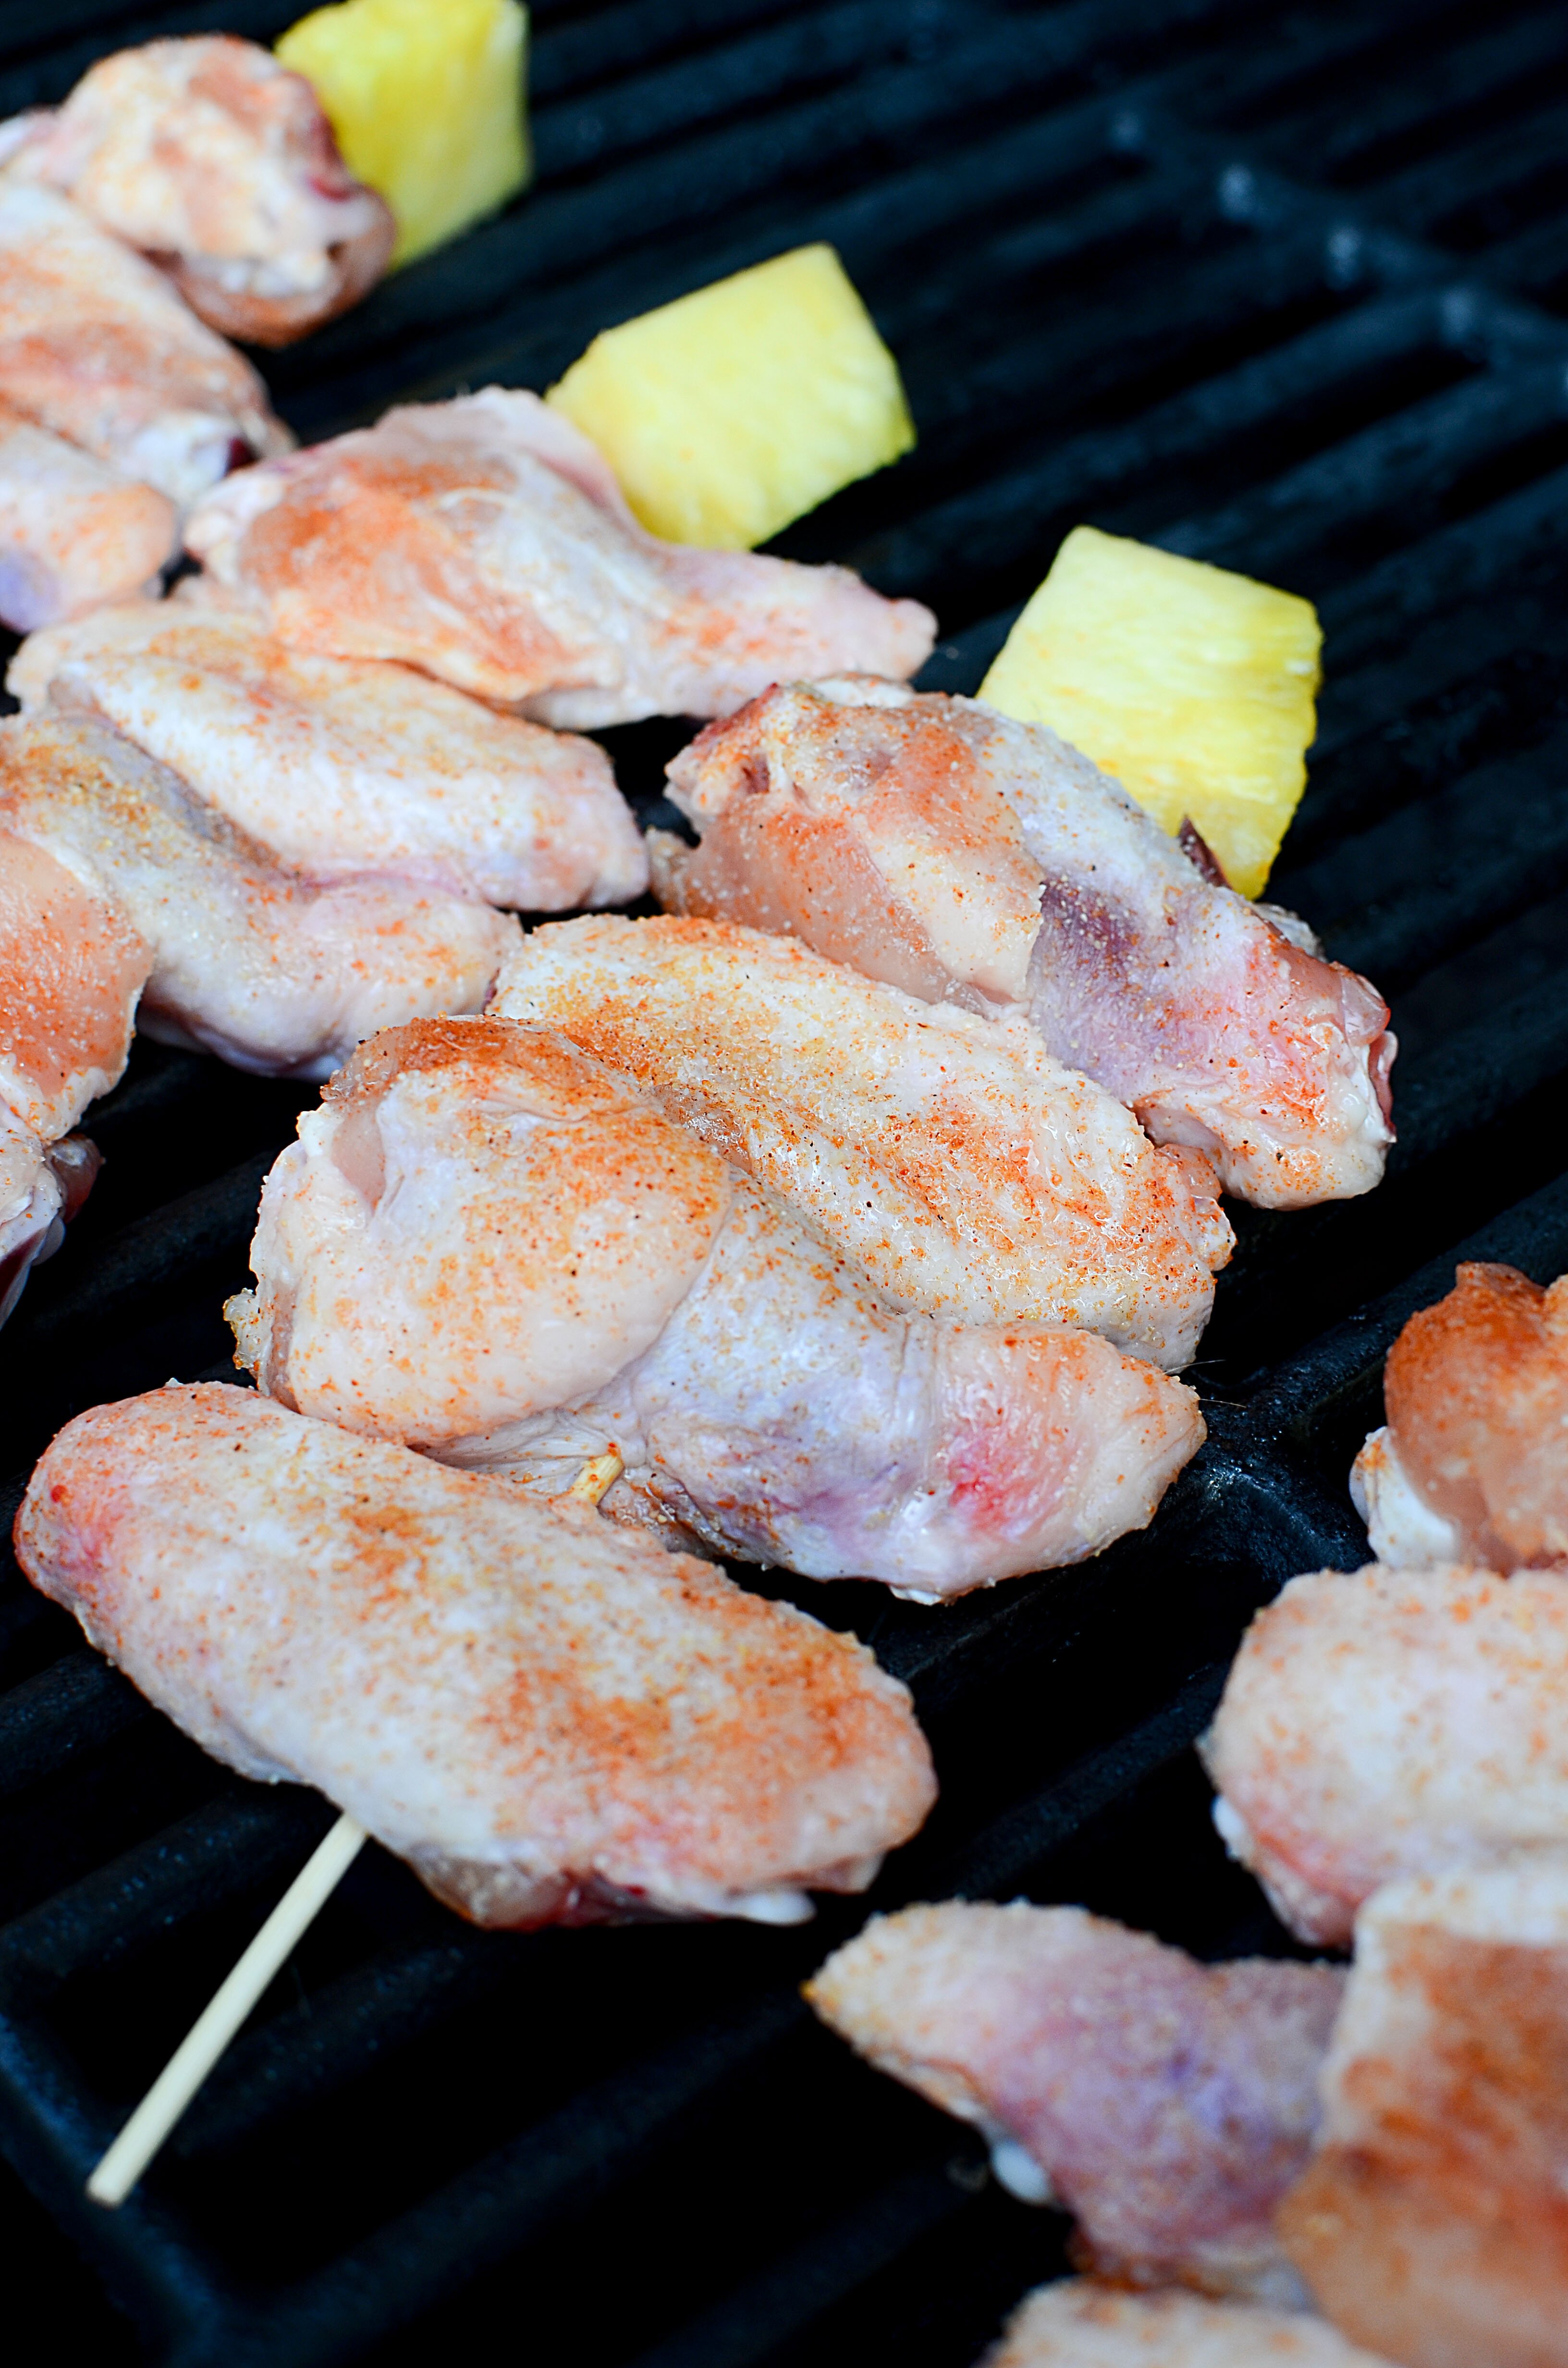 The raw skewered wngs on the grill.